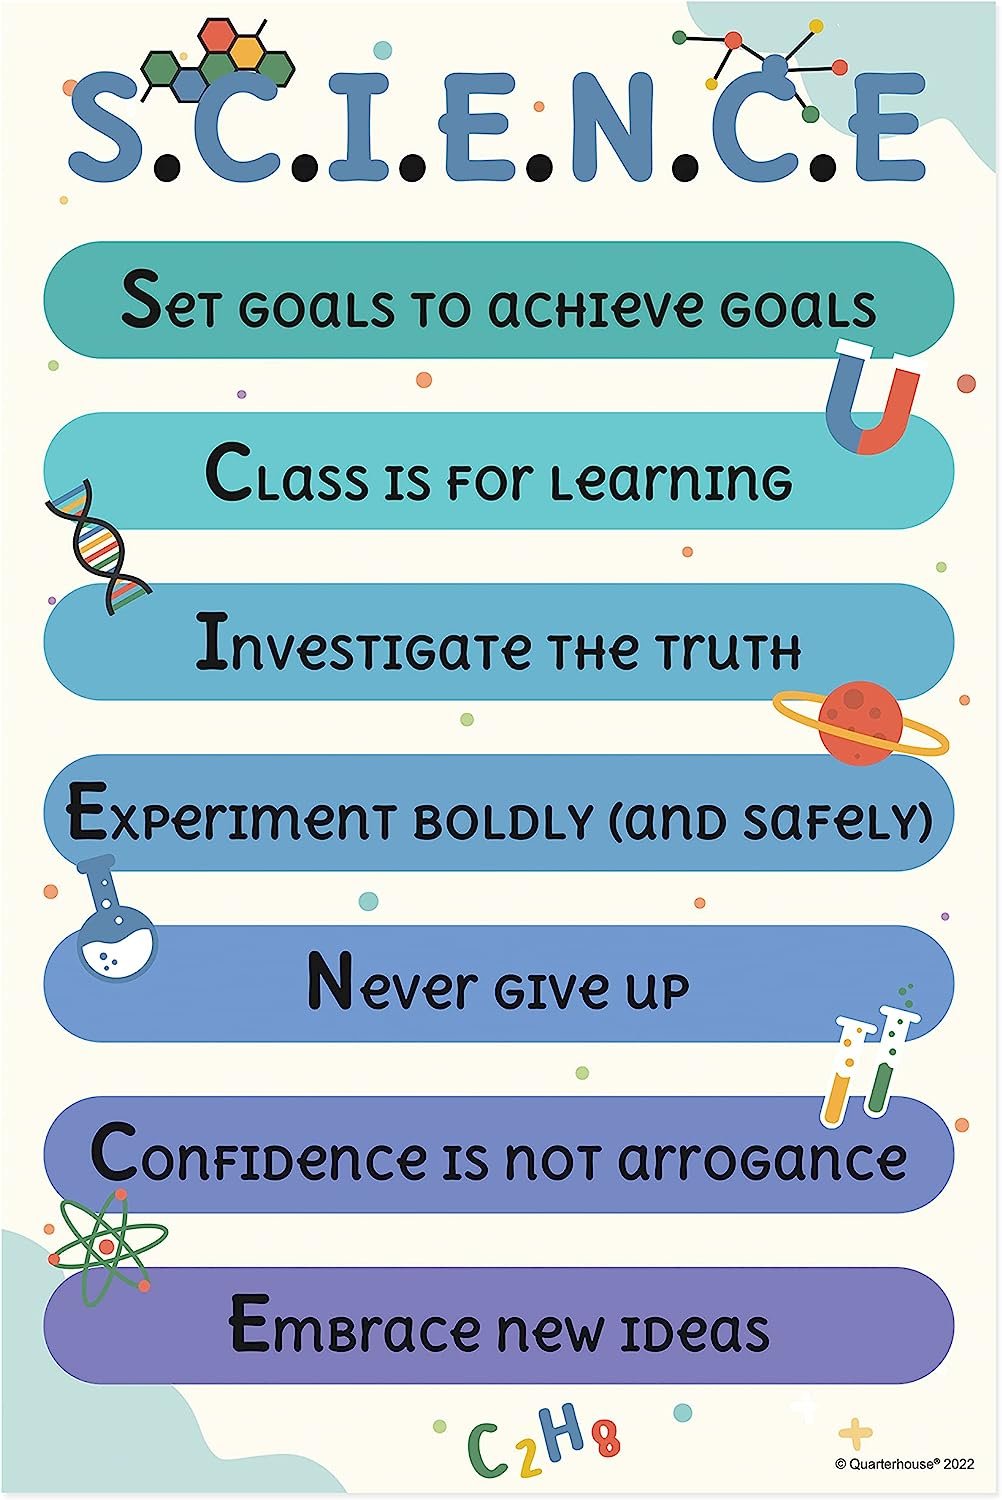 Quarterhouse Science, Math, Social Studies, and English Motivational Poster Set, Elementary Classroom Learning Materials for K-12 Students and Teachers, Set of 4, 12 x 18 Inches, Extra Durable